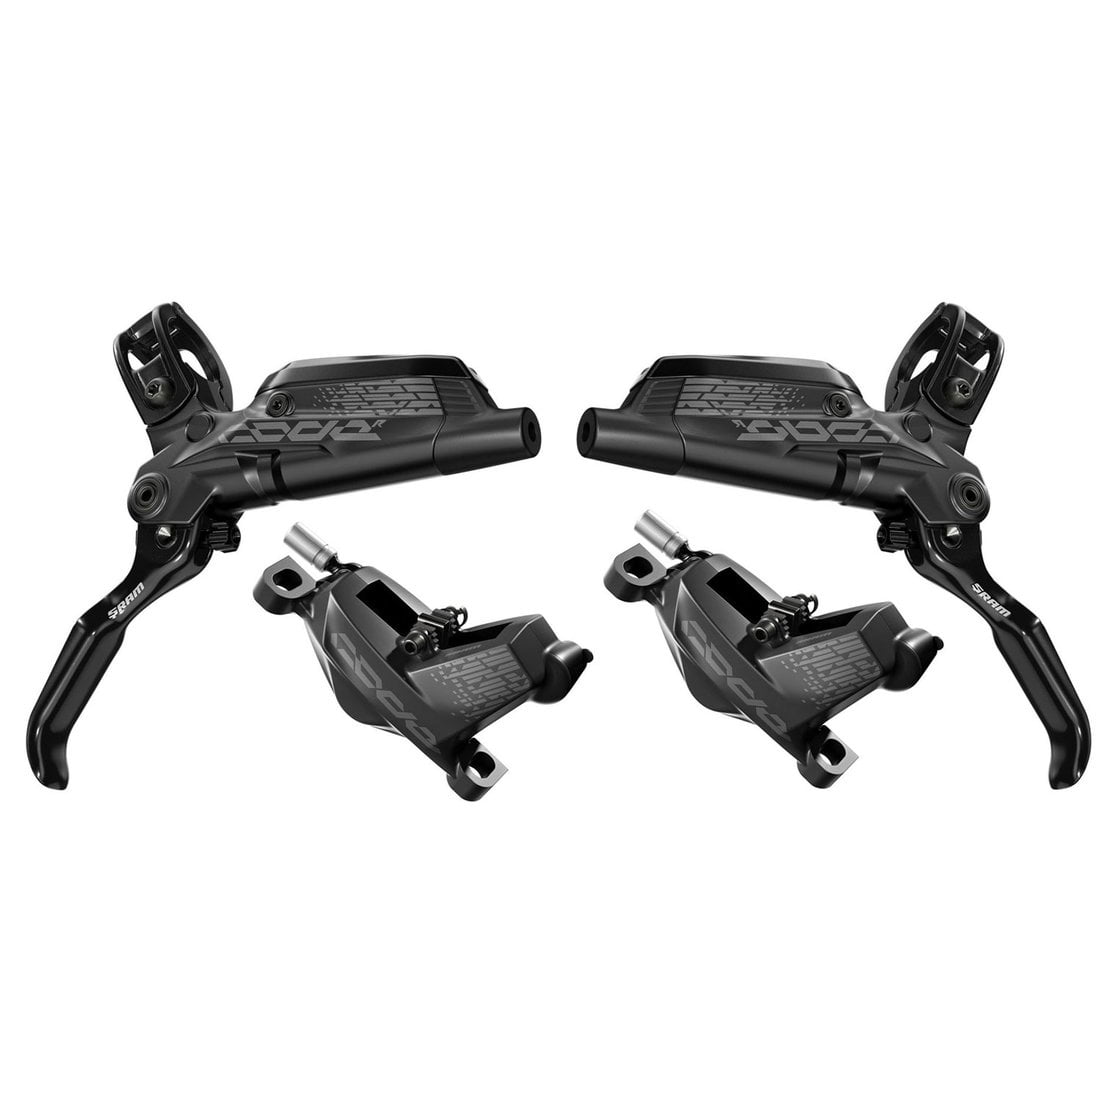 BRAKESET Sram CODE R Complete Front and Rear – Black | Summit Cycles